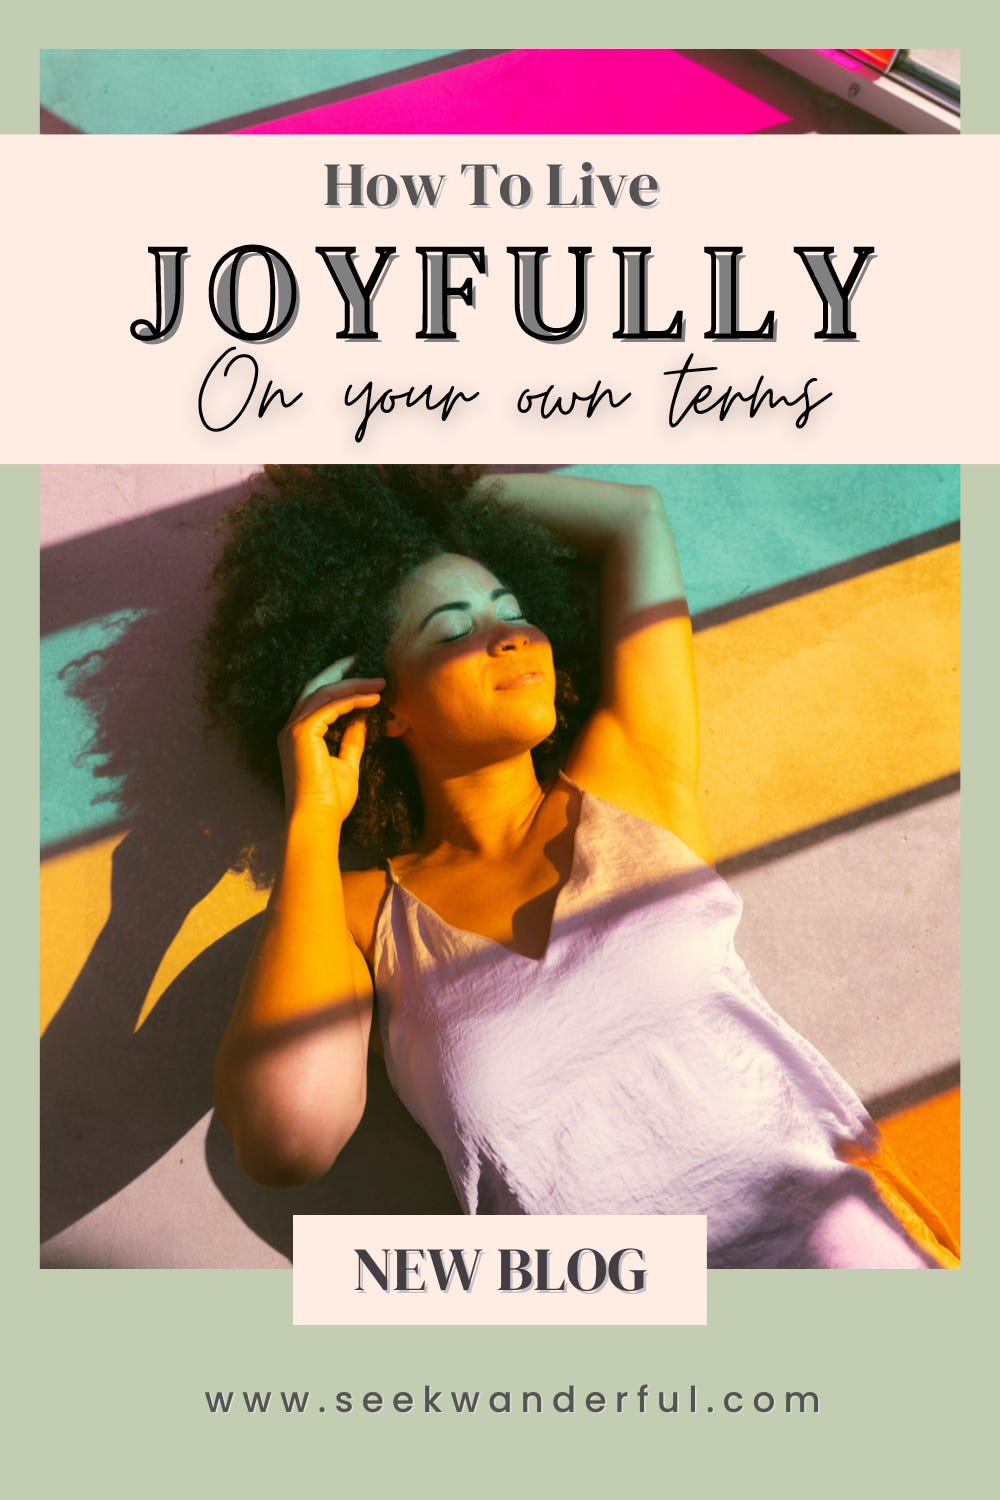 How To Live Joyfully on your own terms: new blog promotion image